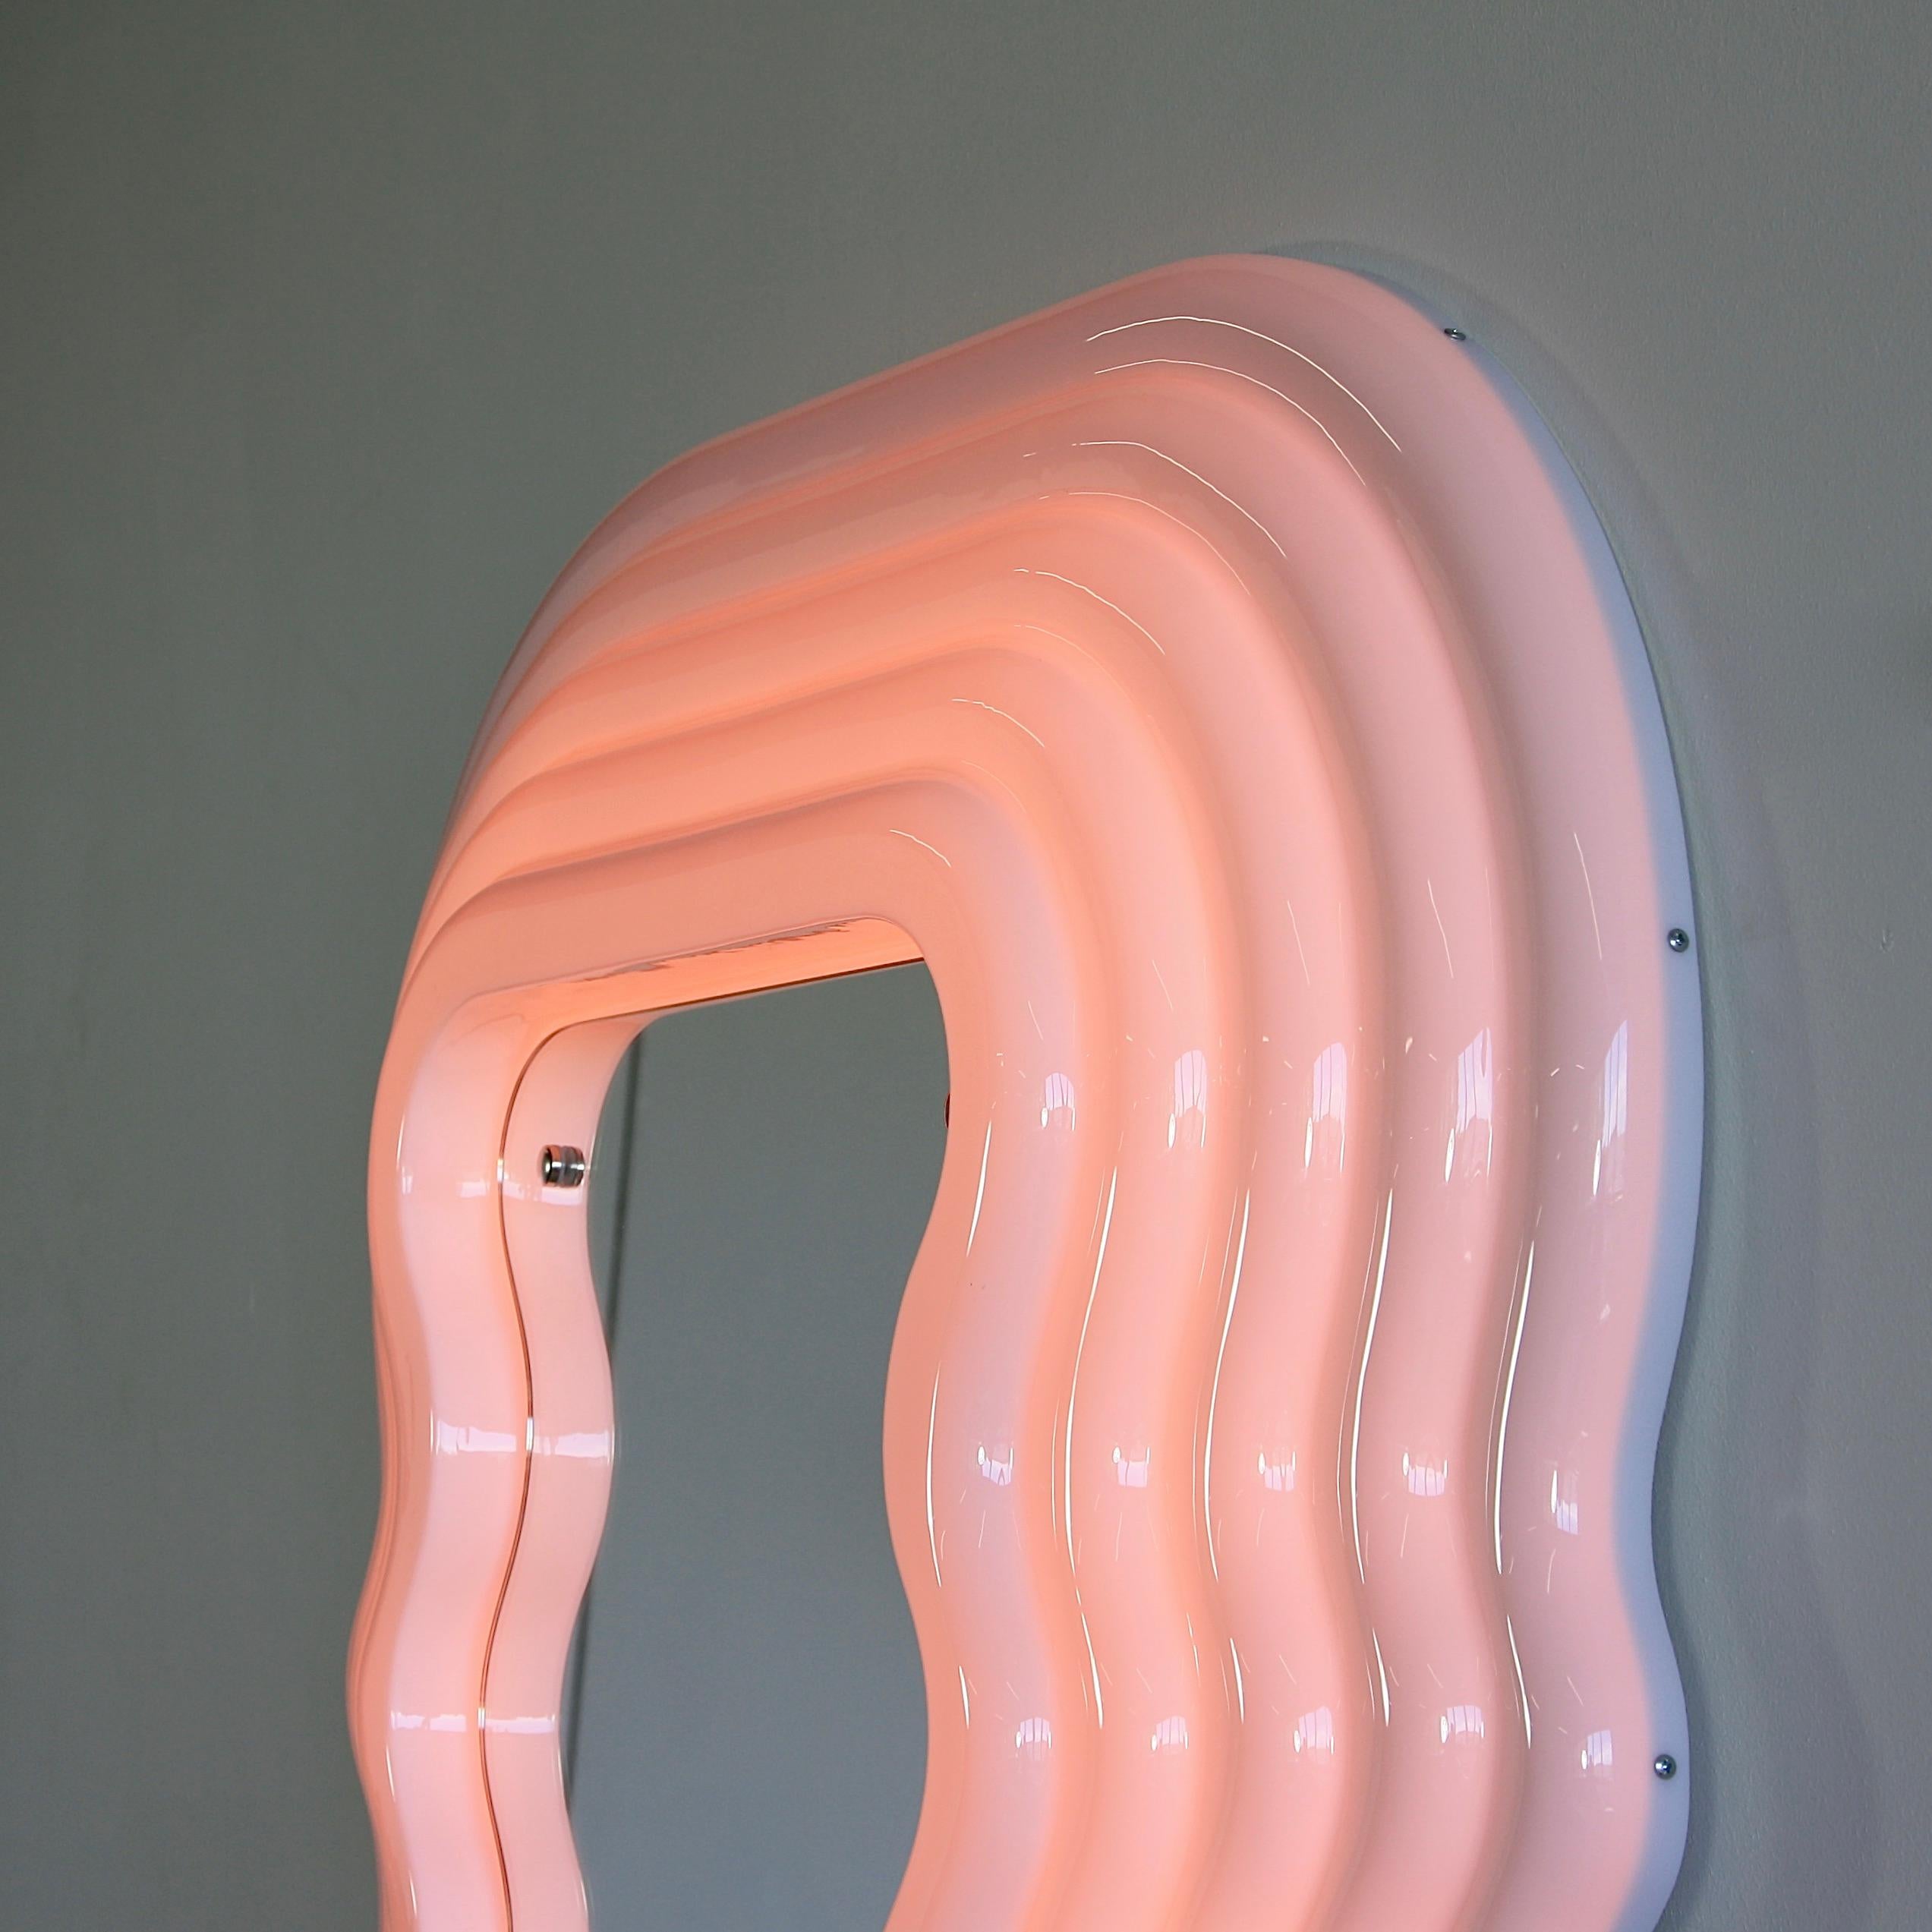 Ultrafragola mirror, designed by Ettore Sottsass, Italy, 1970.

Original recent production mirror made of moulded fibreglass with hard-back and shaped mirror. The frame is white, turning pink when the light is switched on.

